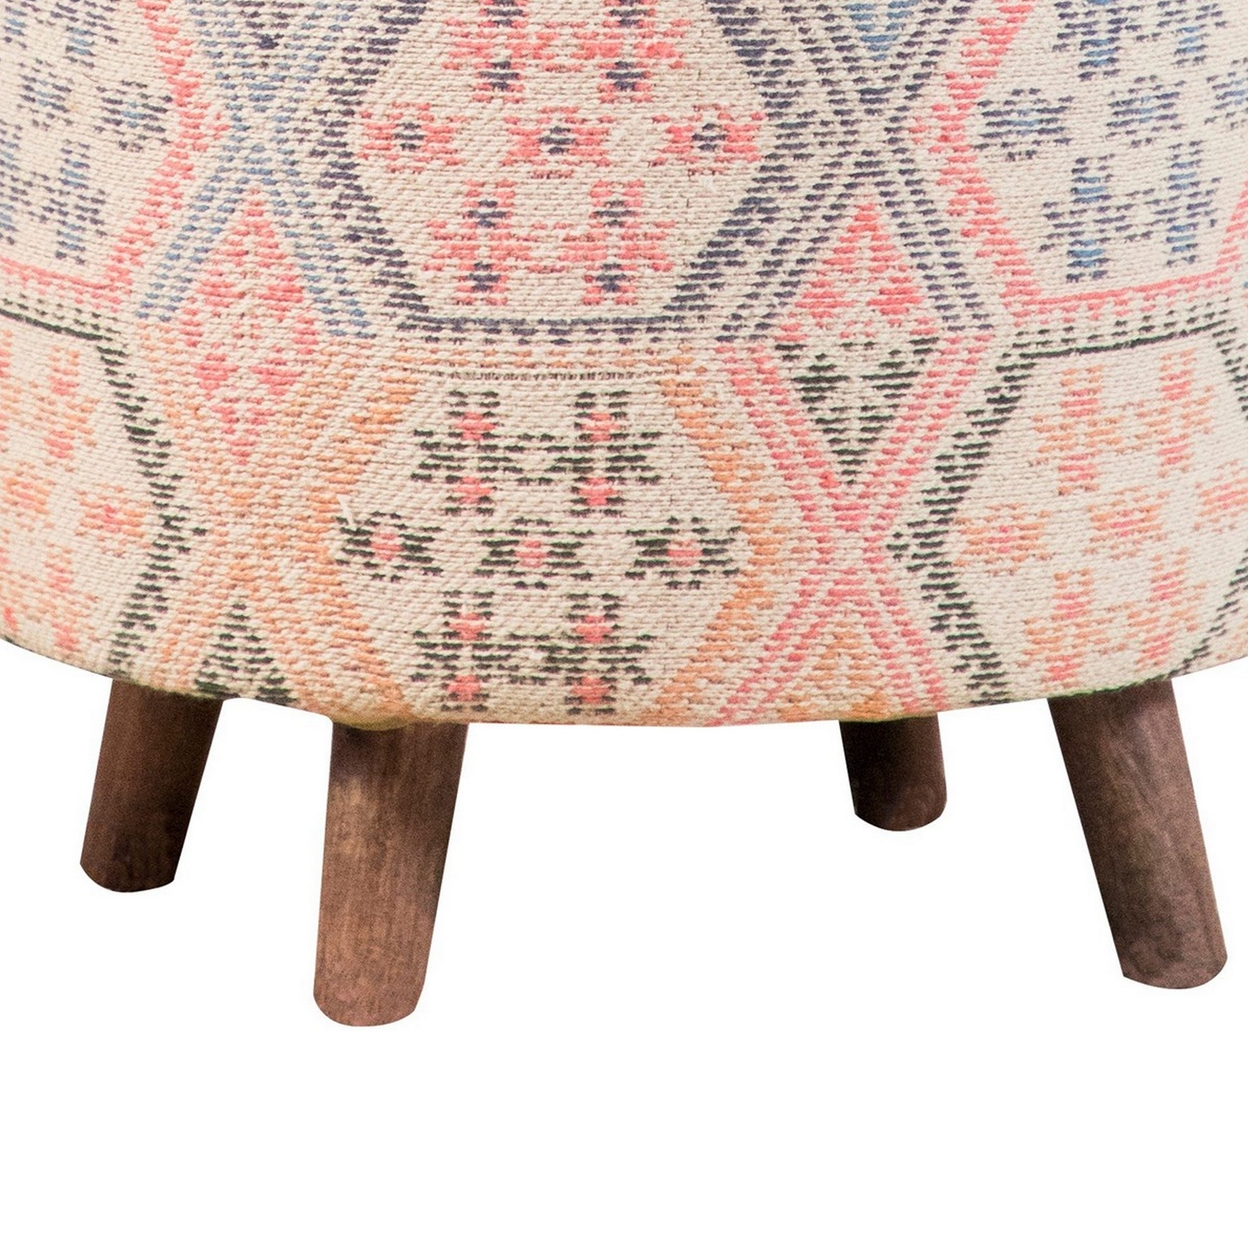 18 Inch Bohemian Style Wood Accent Stool With Multicolor Woven Upholstery- Saltoro Sherpi